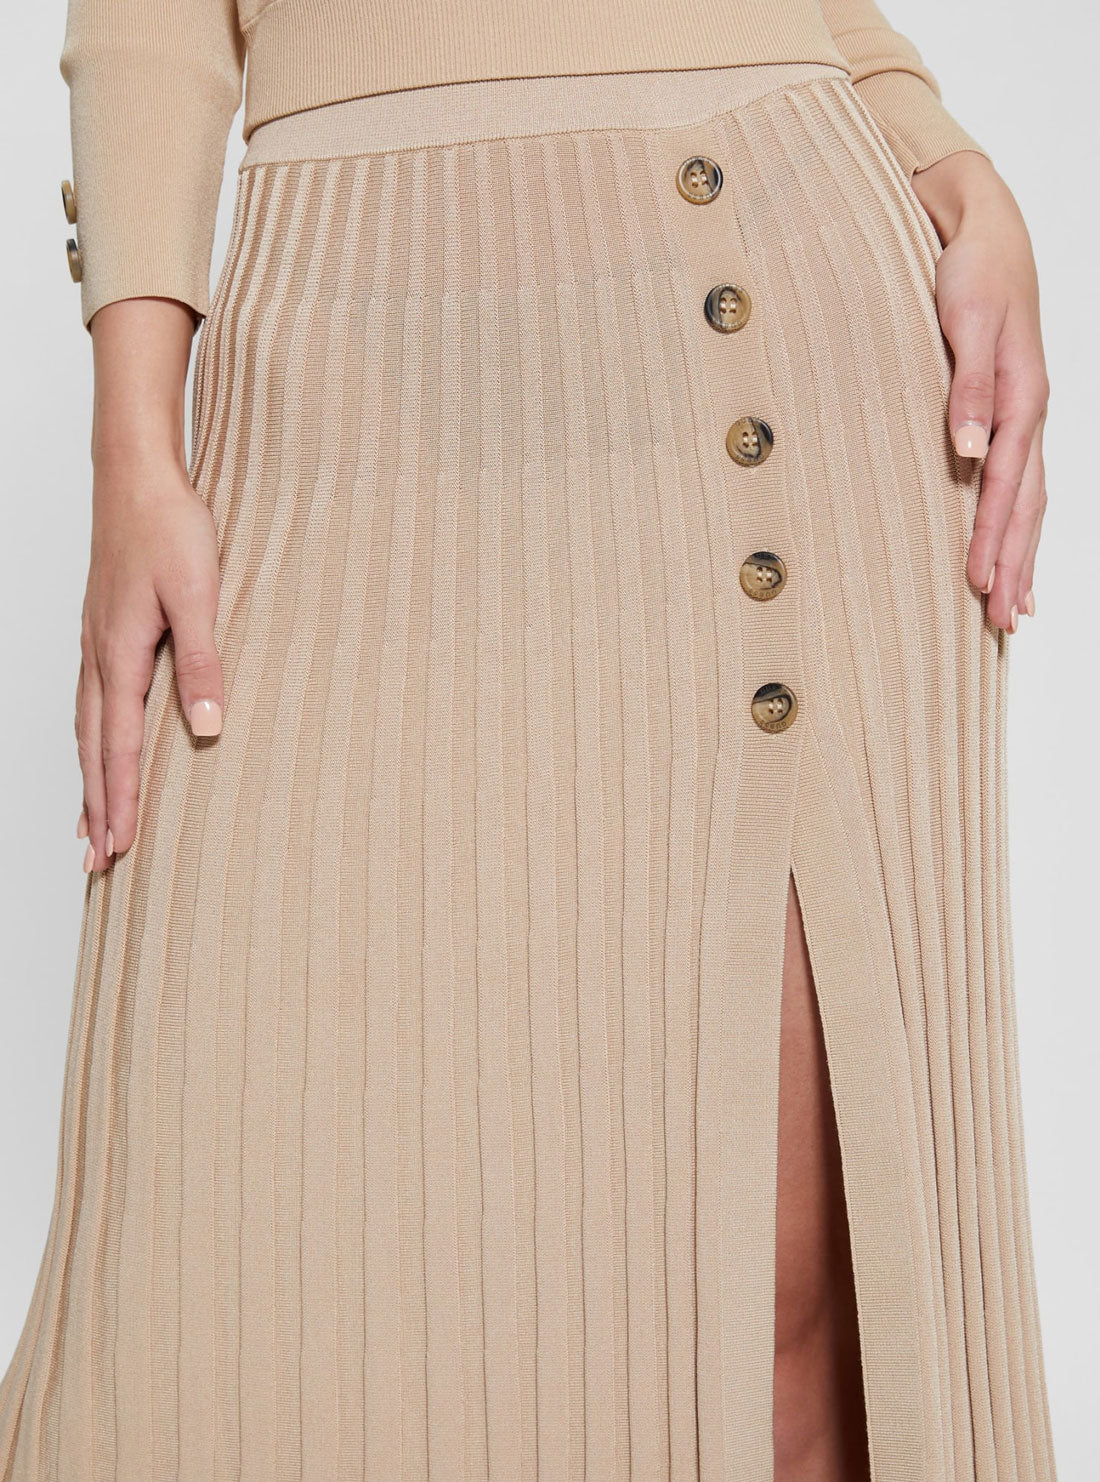 GUESS Beige Shopie Pleated Knit Skirt detail view